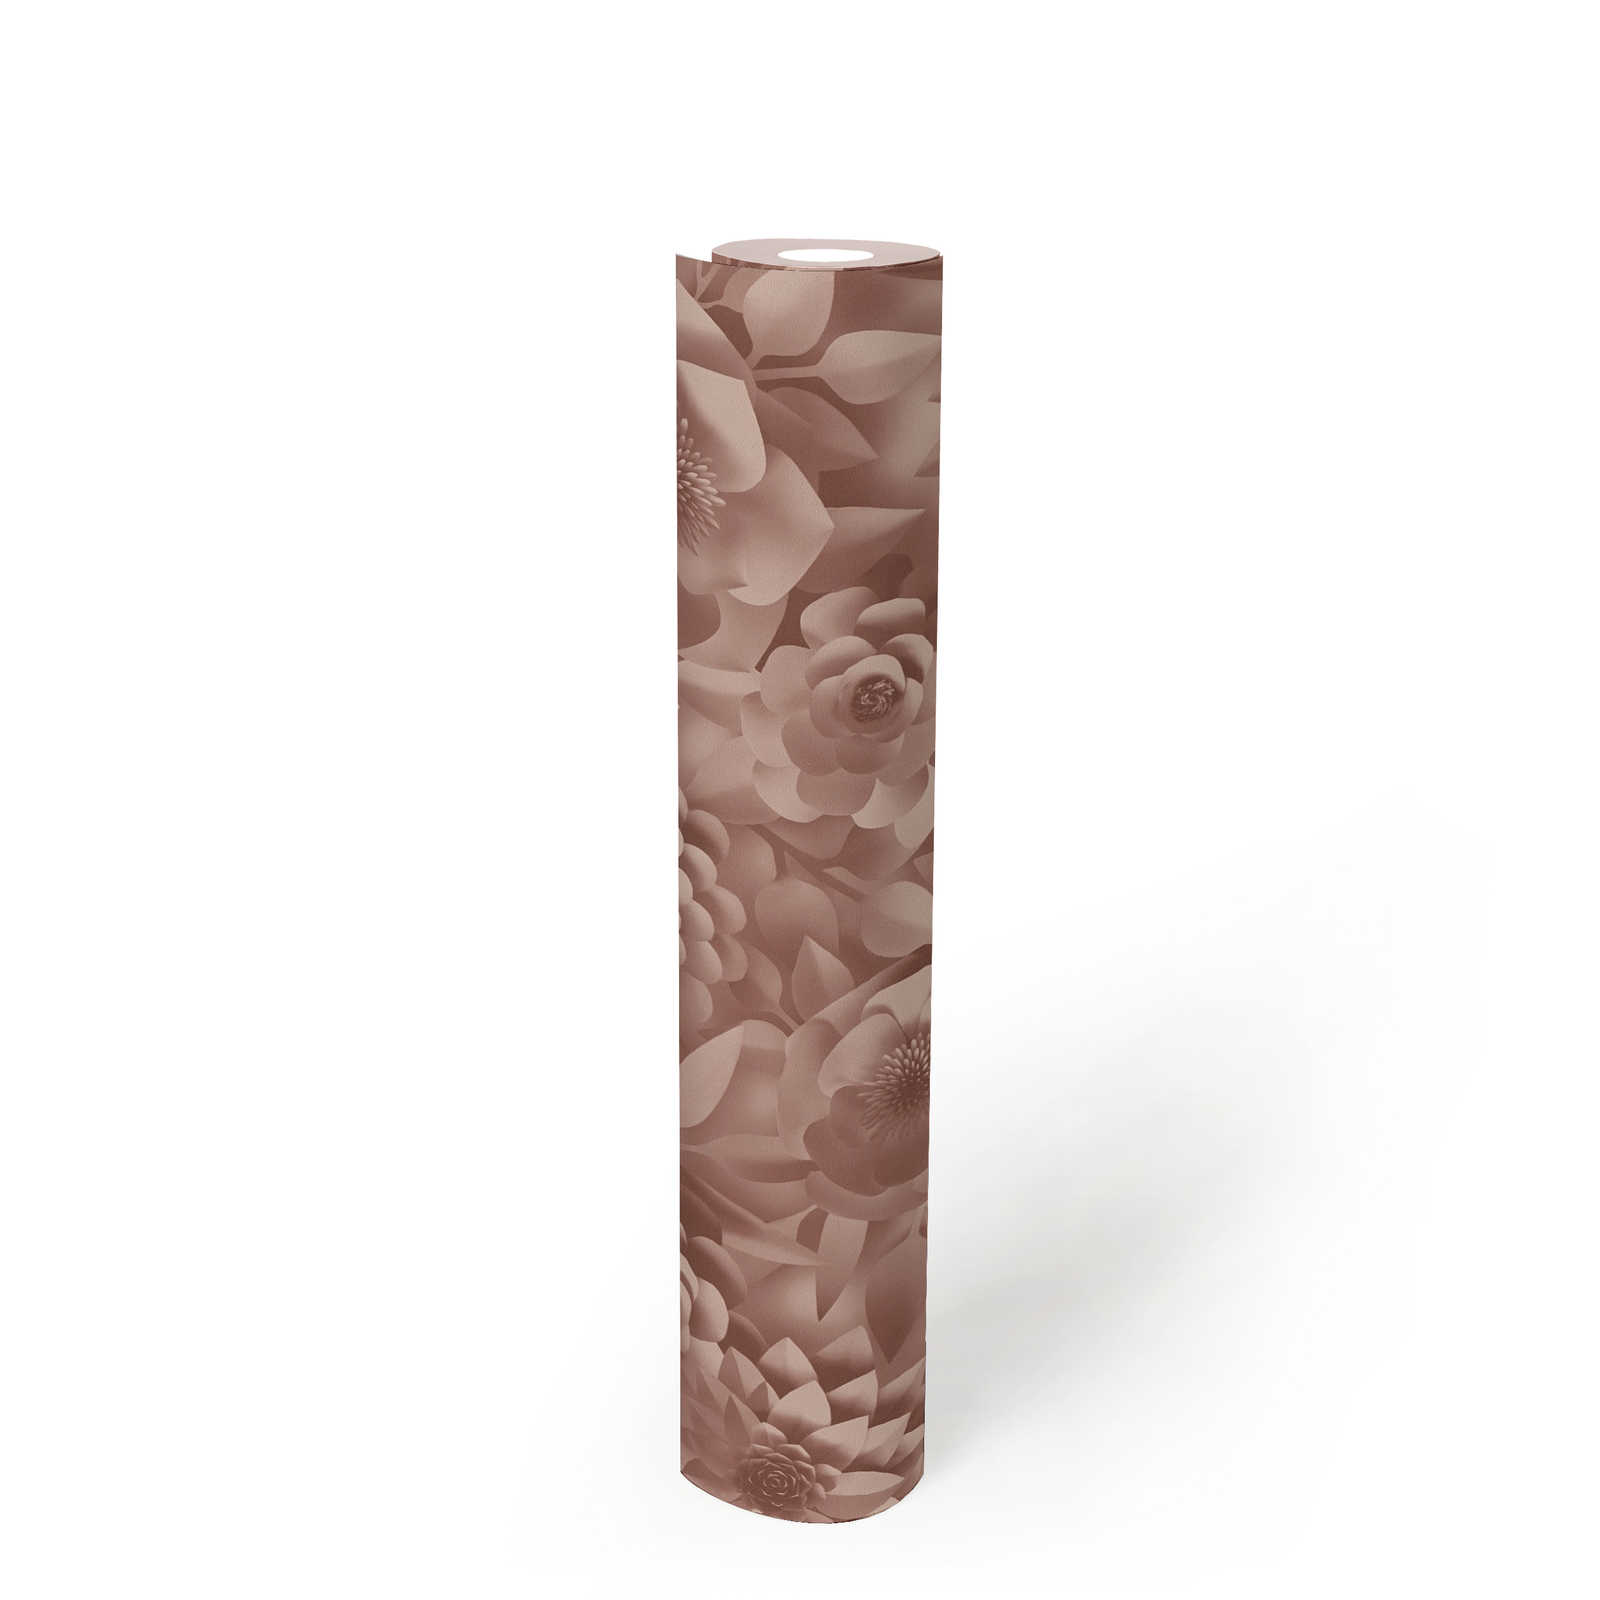             3D wallpaper with paper flowers, graphic floral pattern - pink
        